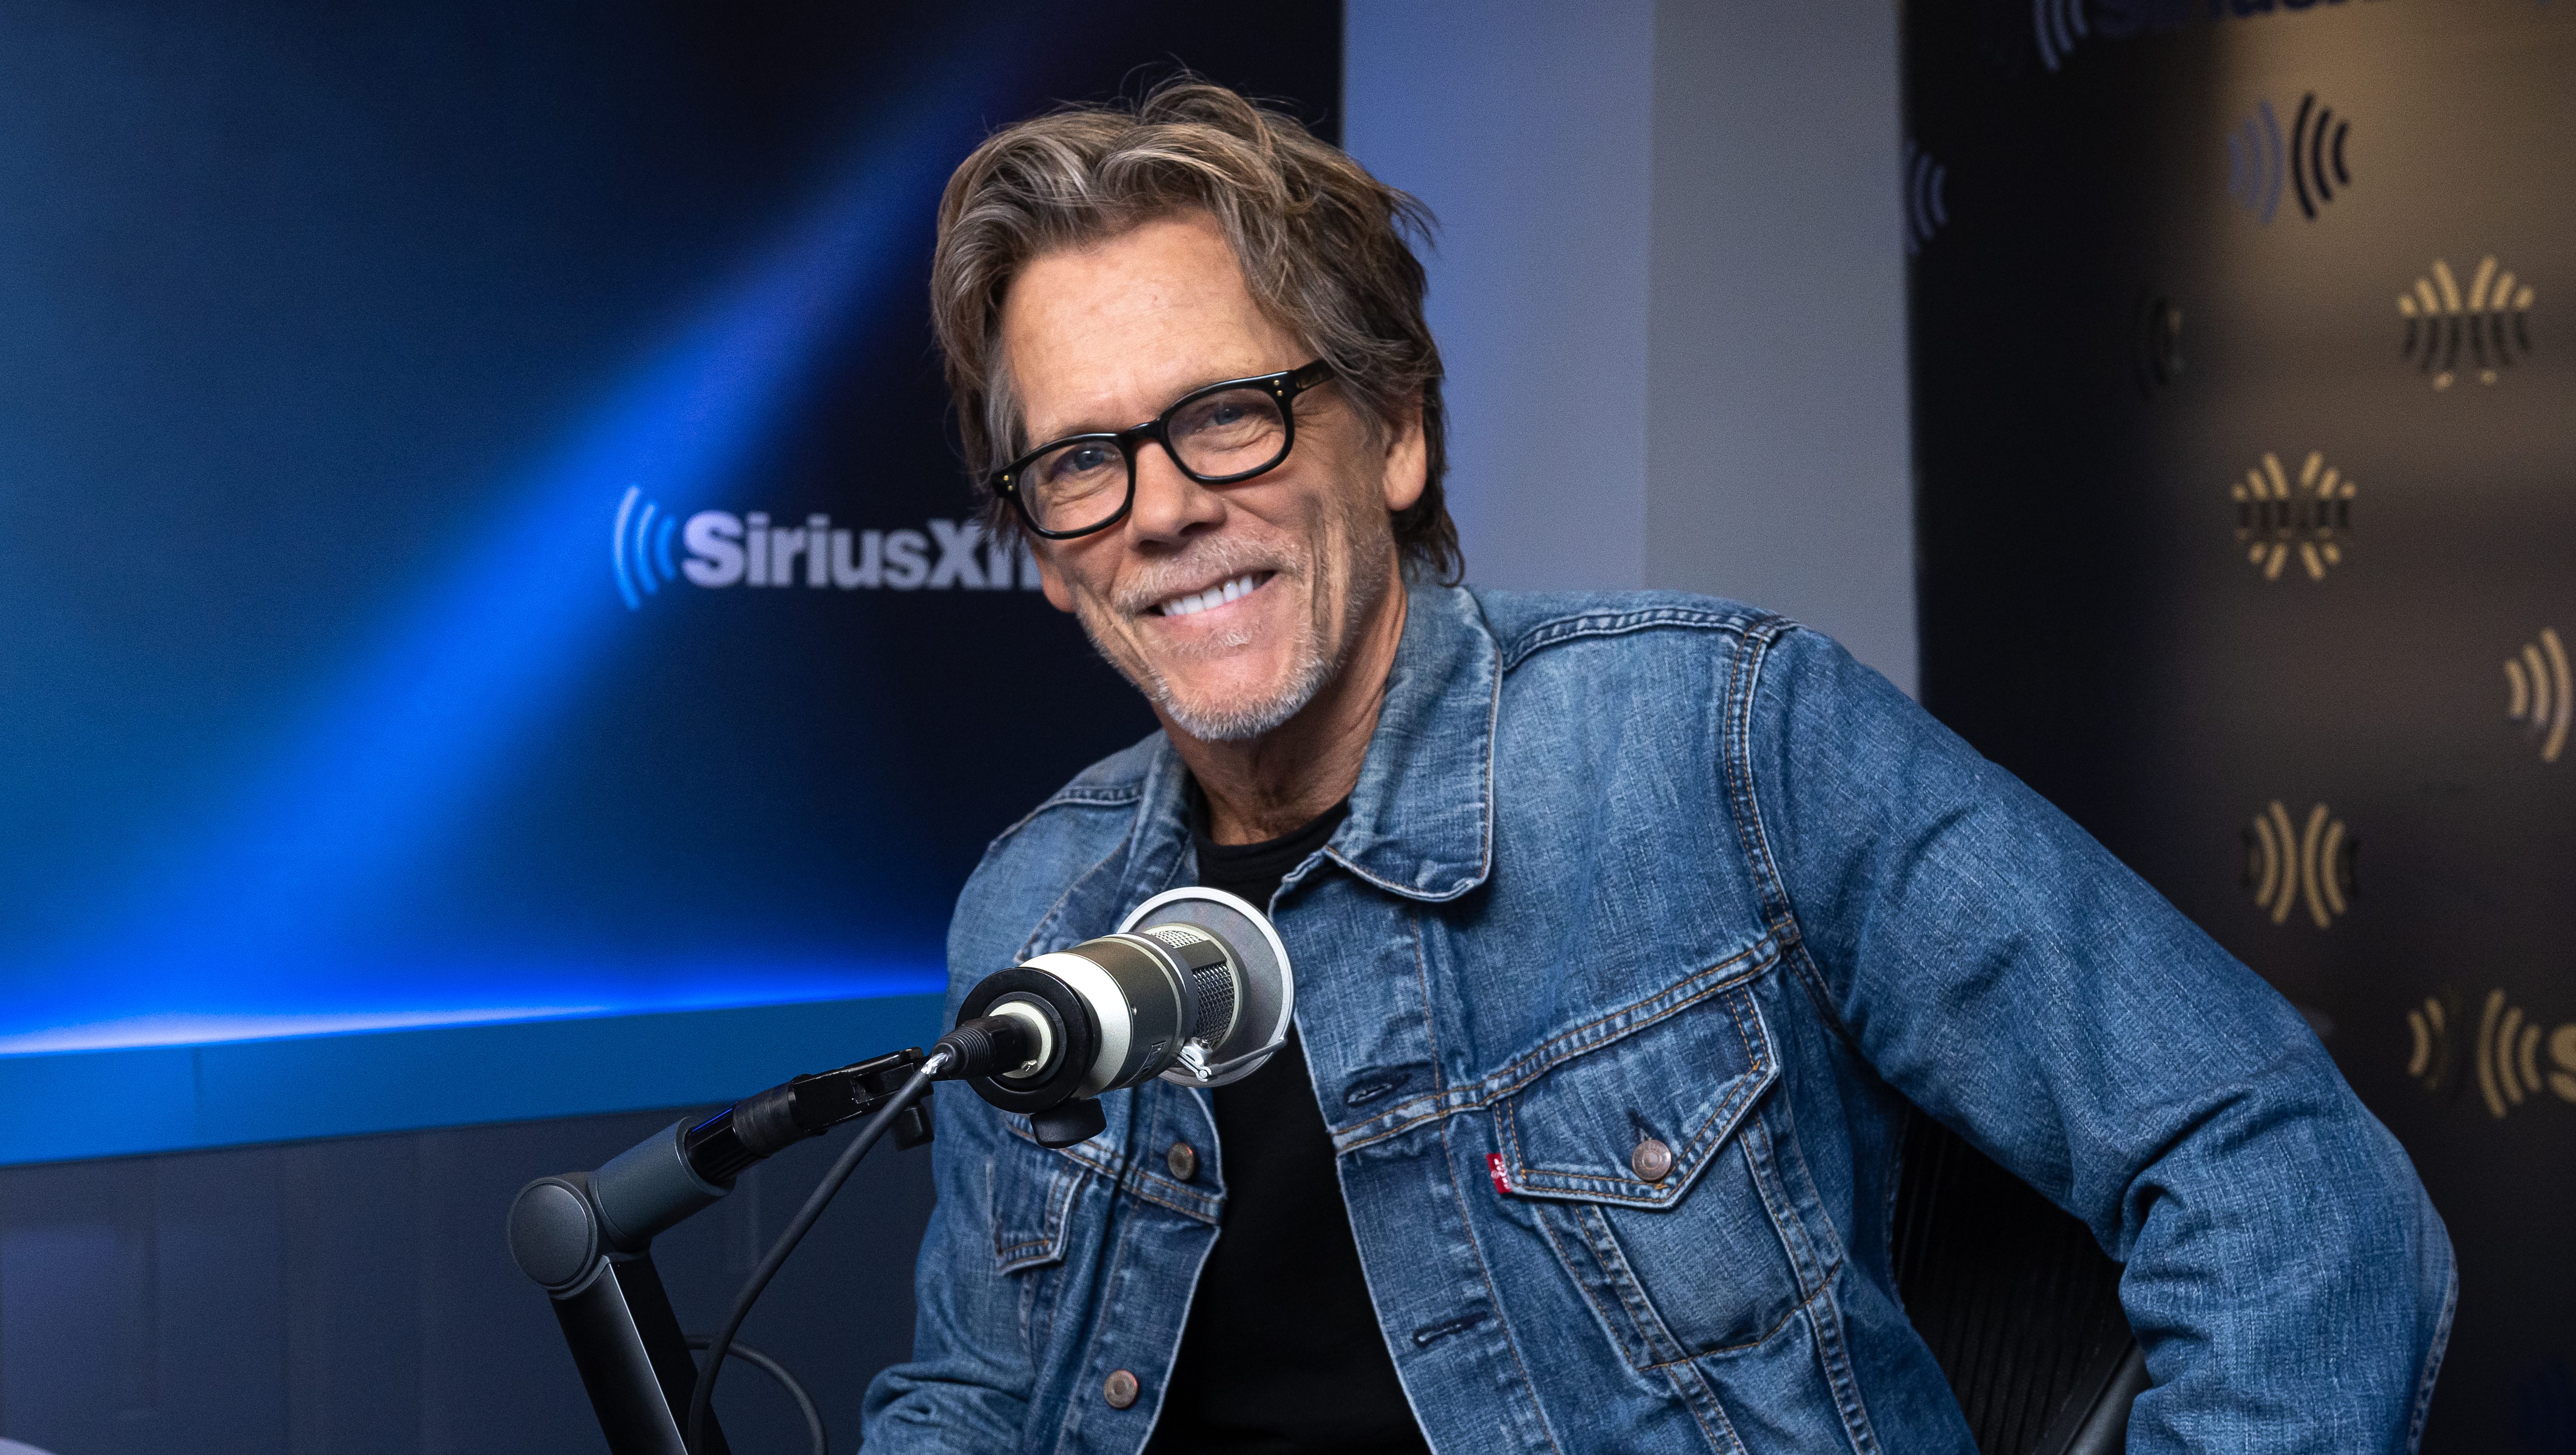 Kevin Bacon Wanted to ‘Go Back to Being Famous’ After Disguising Himself as an Anonymous Person